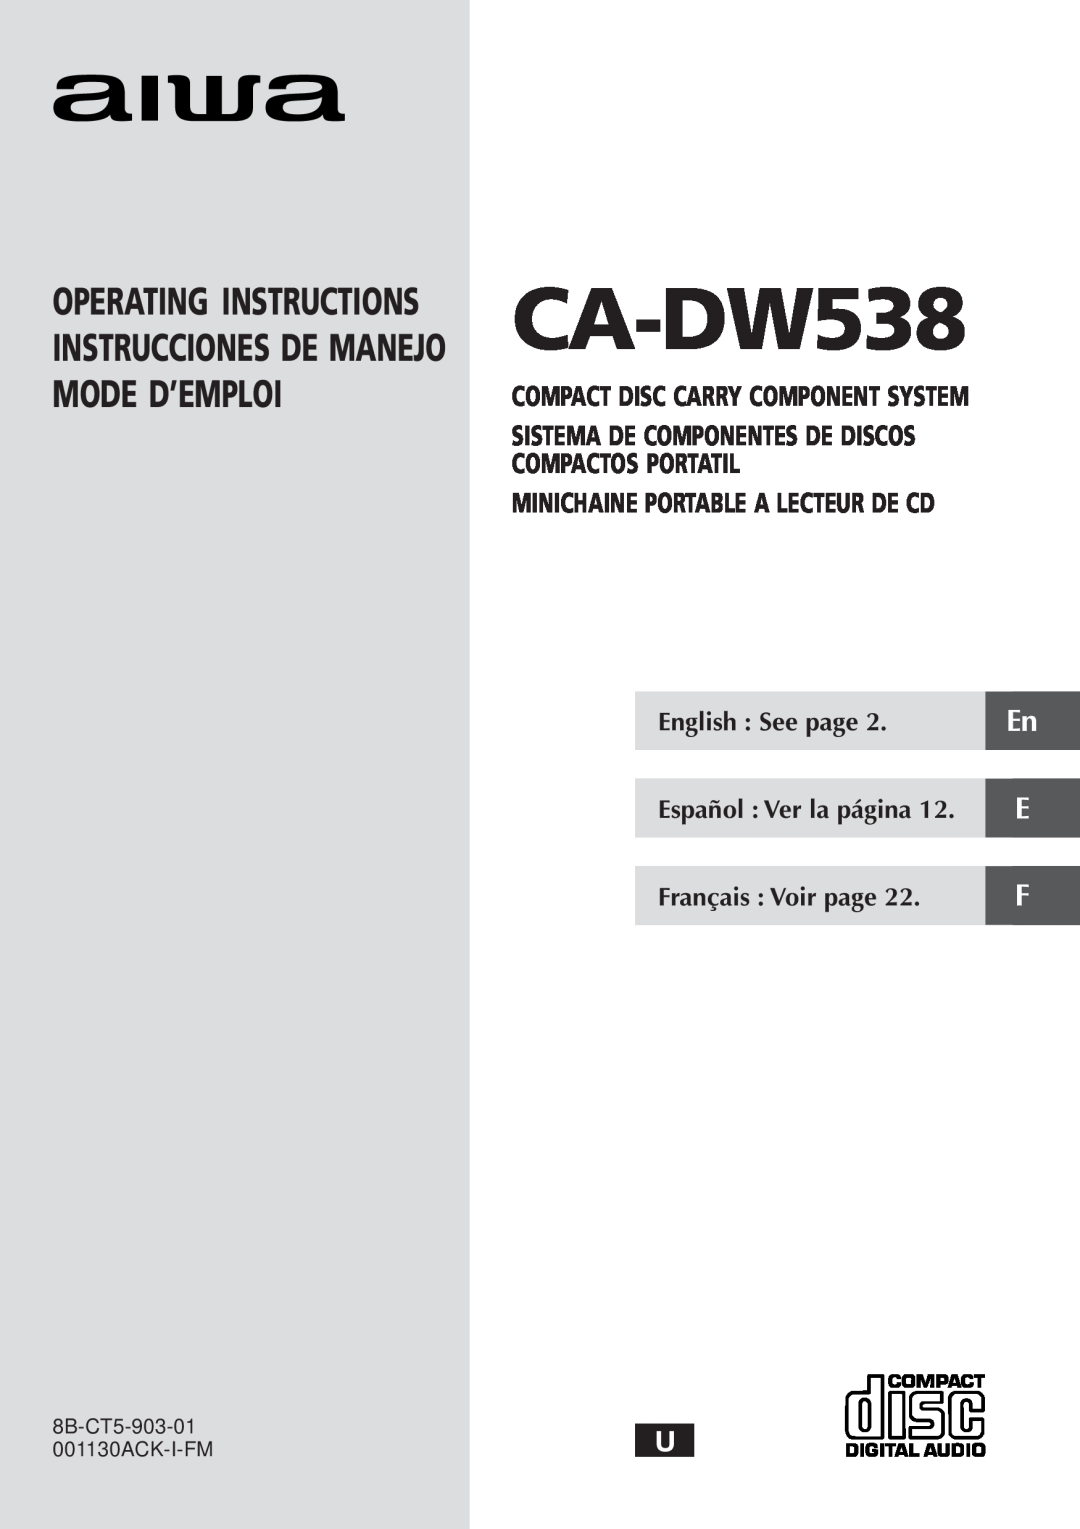 Aiwa CA-DW538 operating instructions Compact Disc Carry Component System, English See page, Español Ver la página 